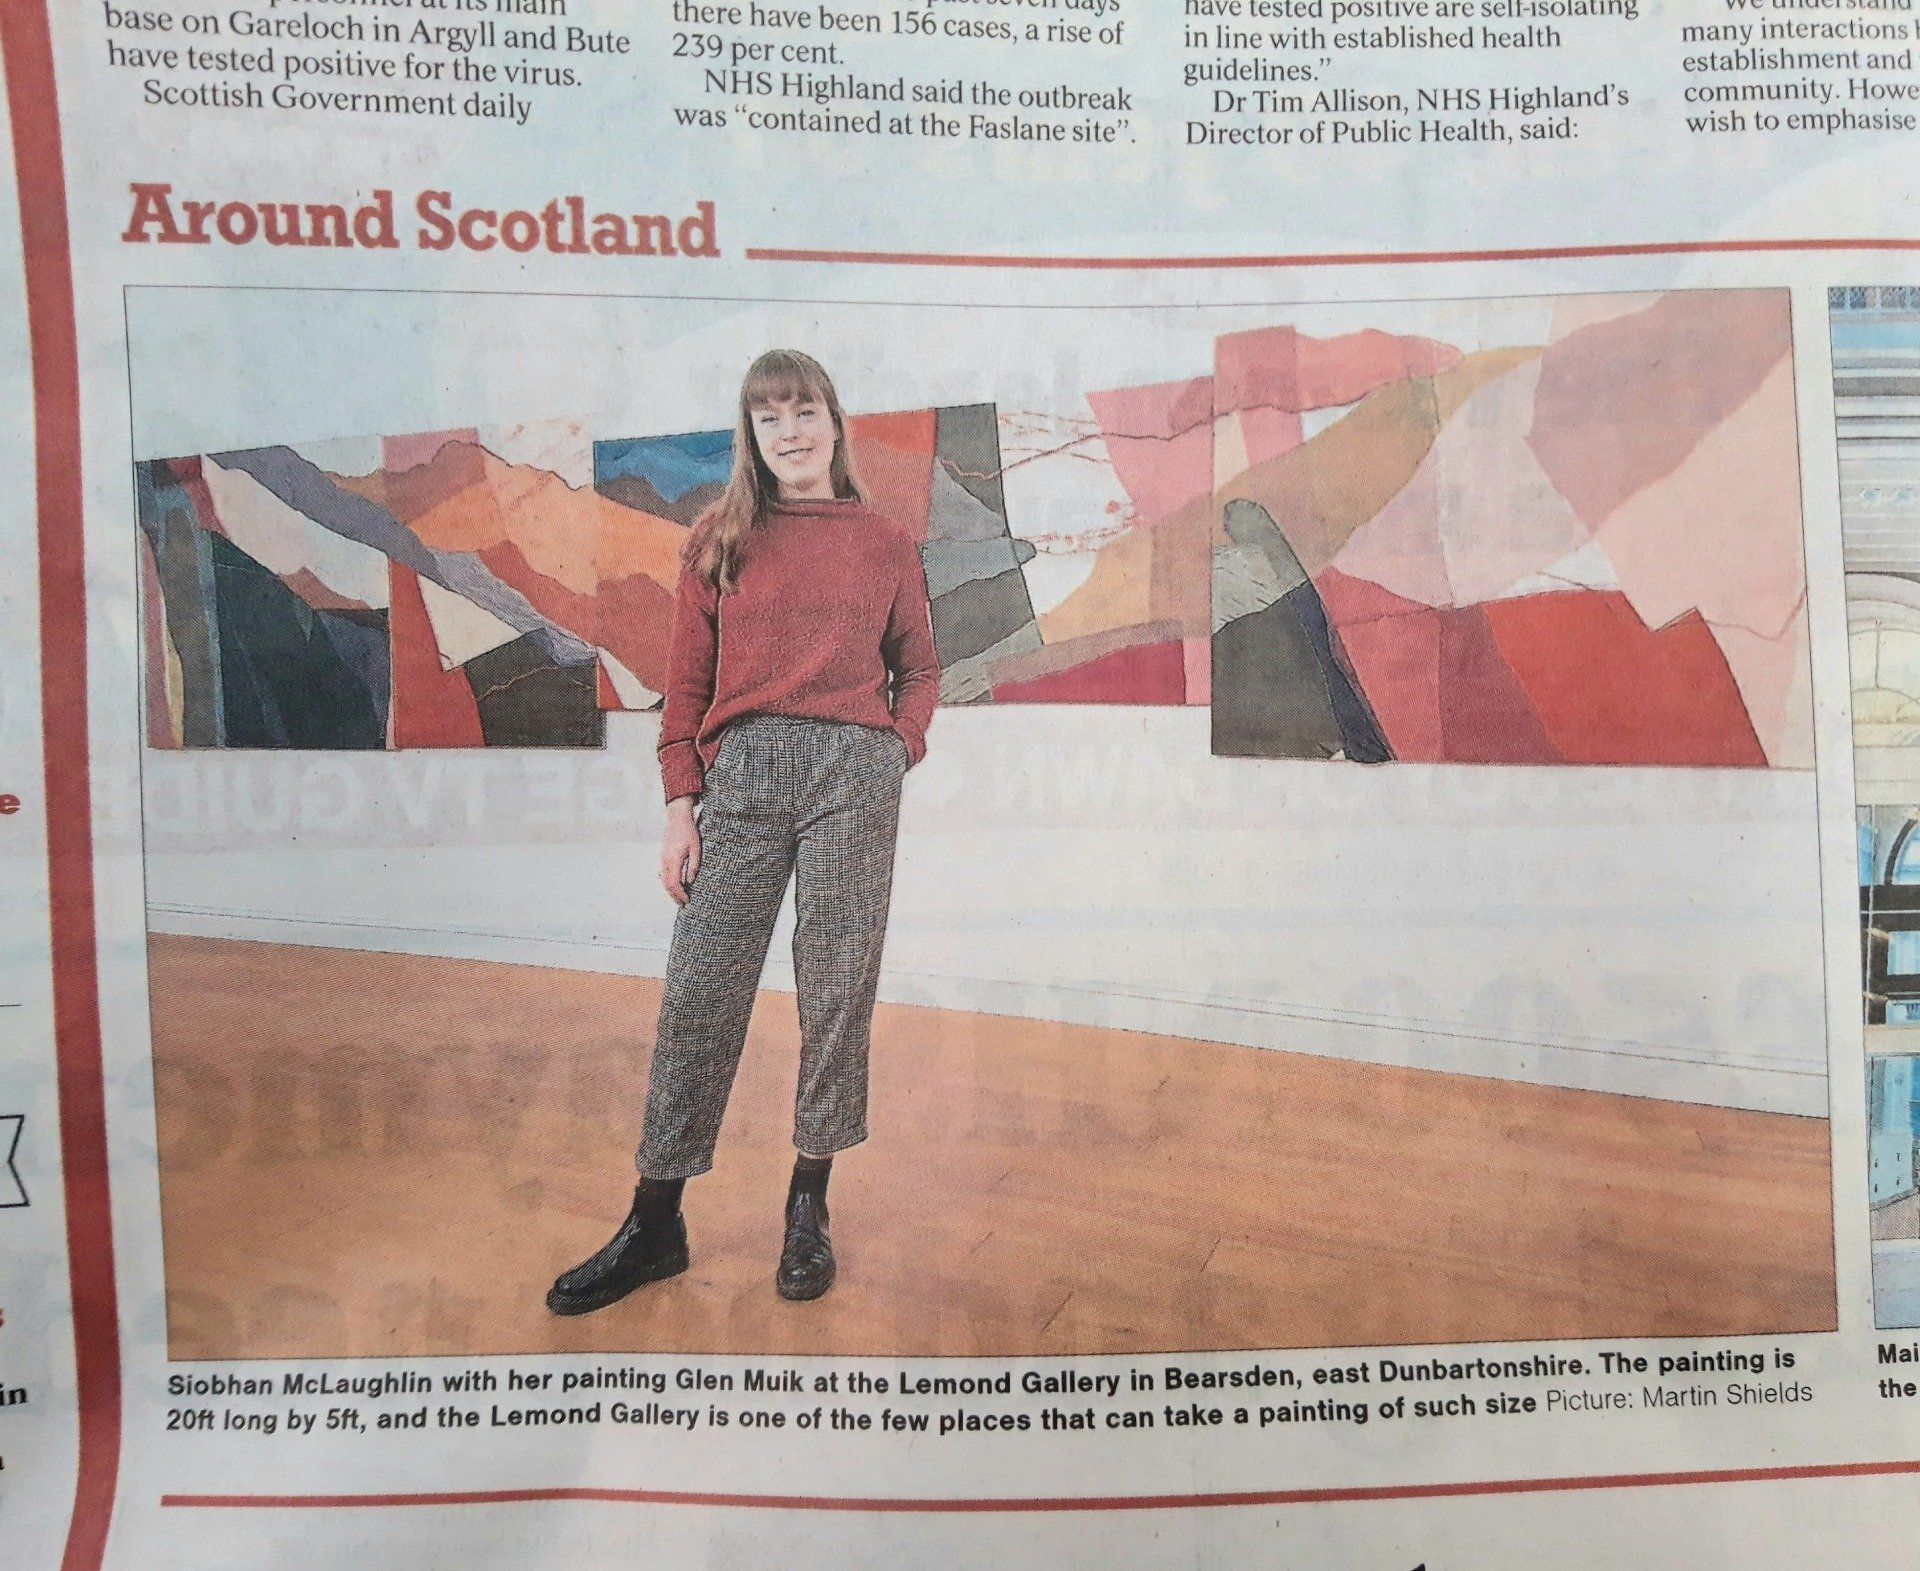 Newpaper cutting of artist standing in gallery space with paintings on the wall